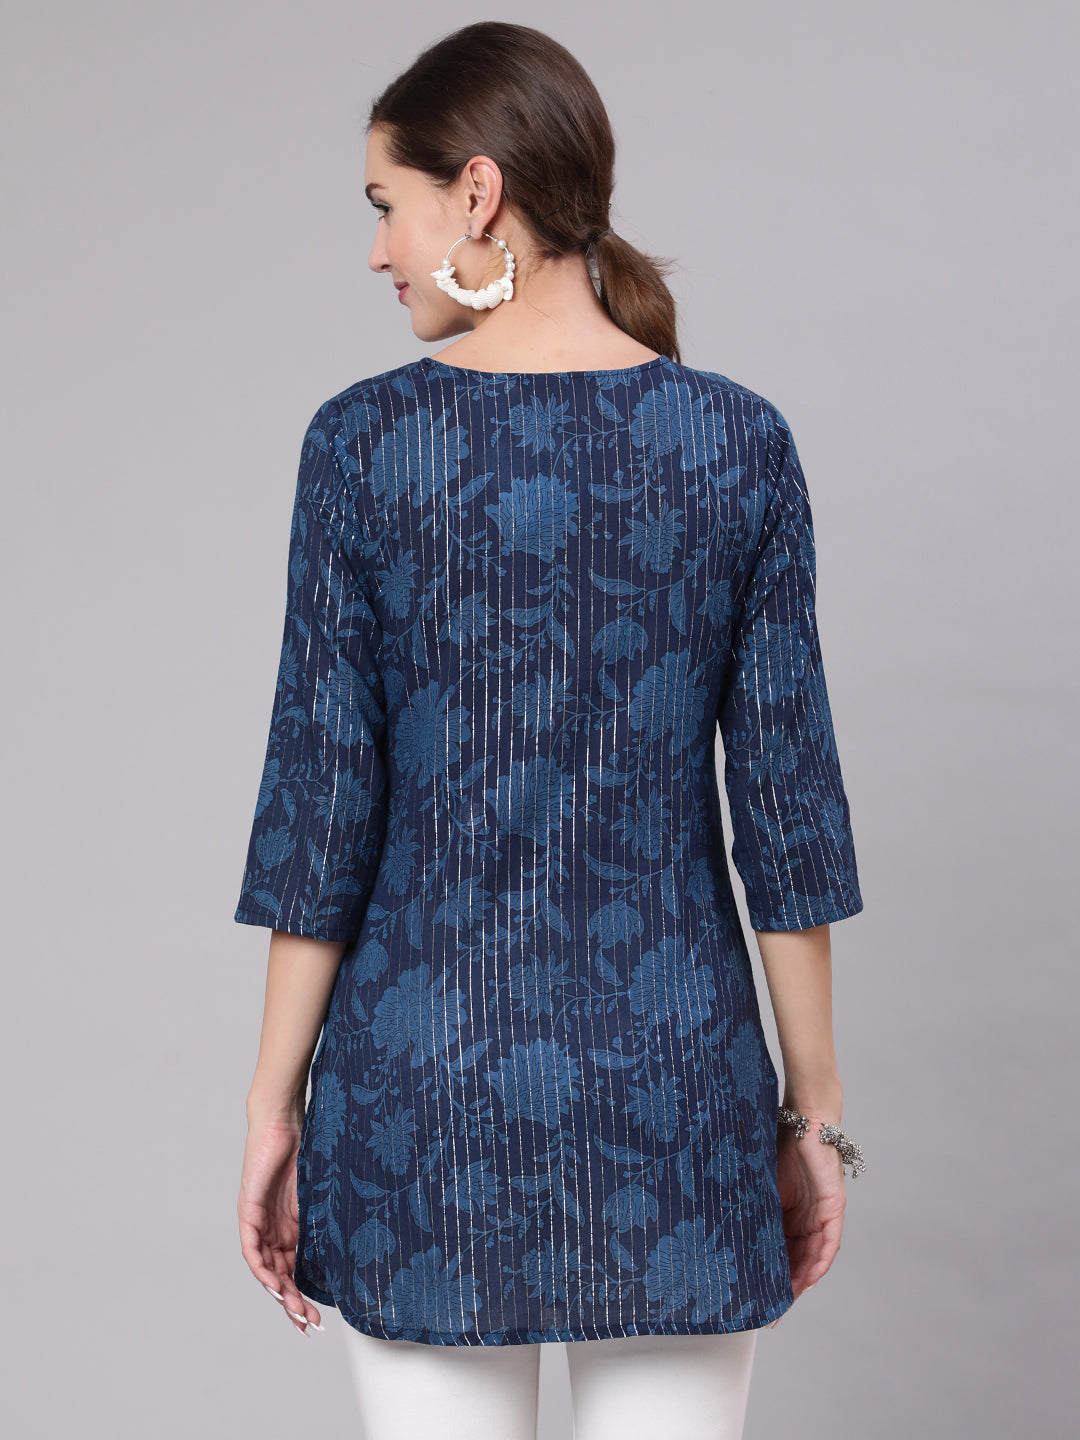 Navy Blue Floral Printed Straight Tunic